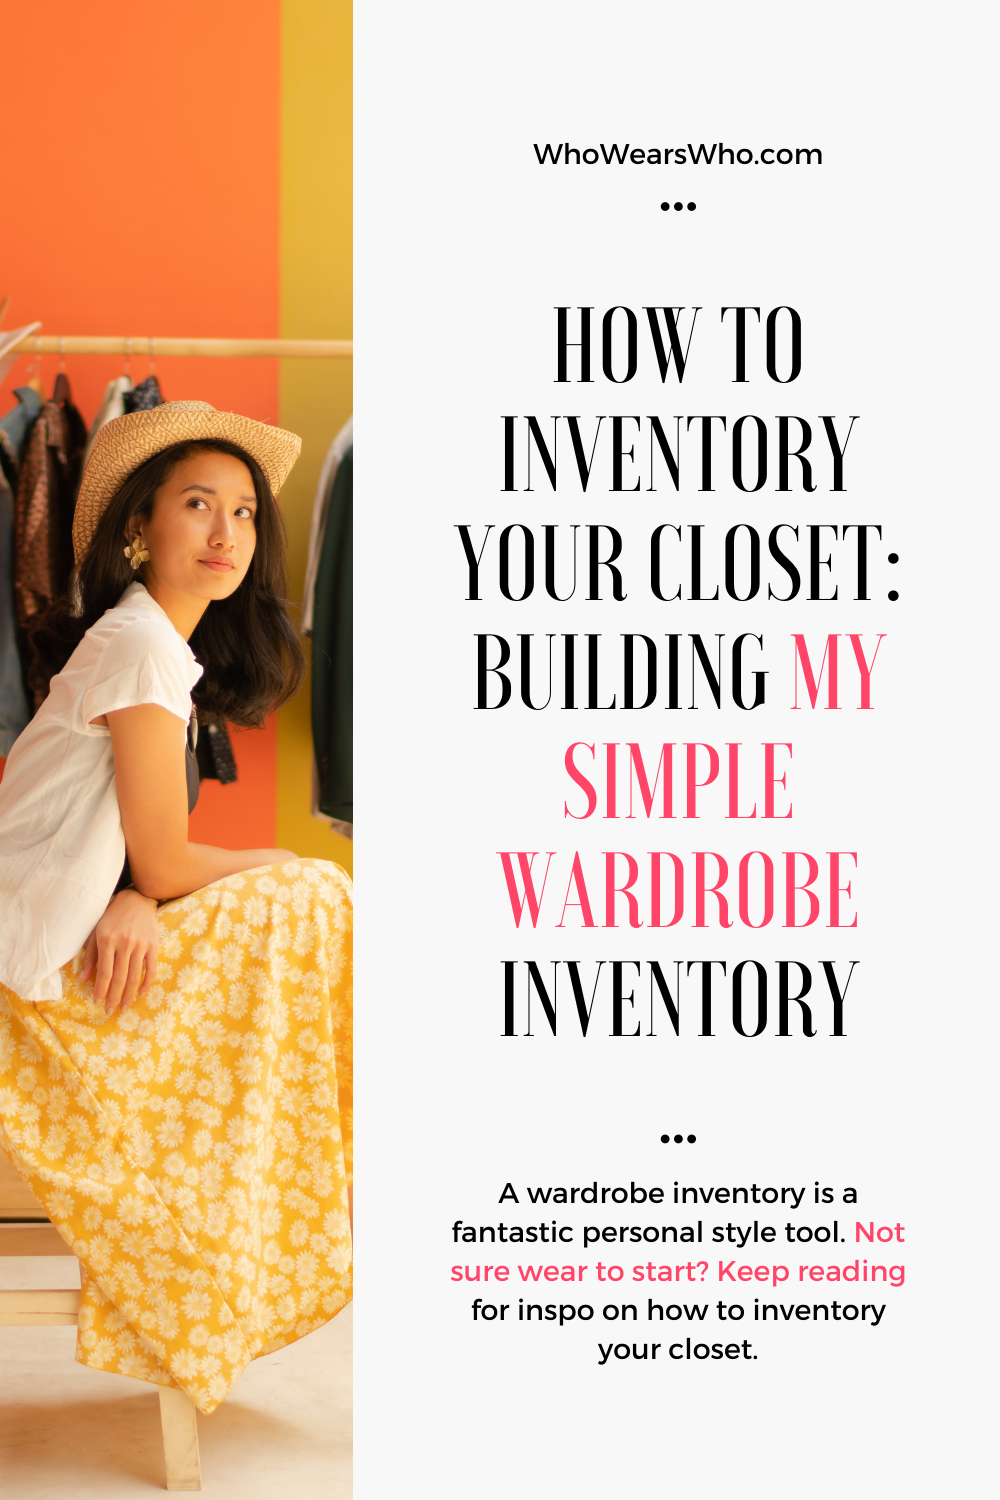 How to inventory your closet